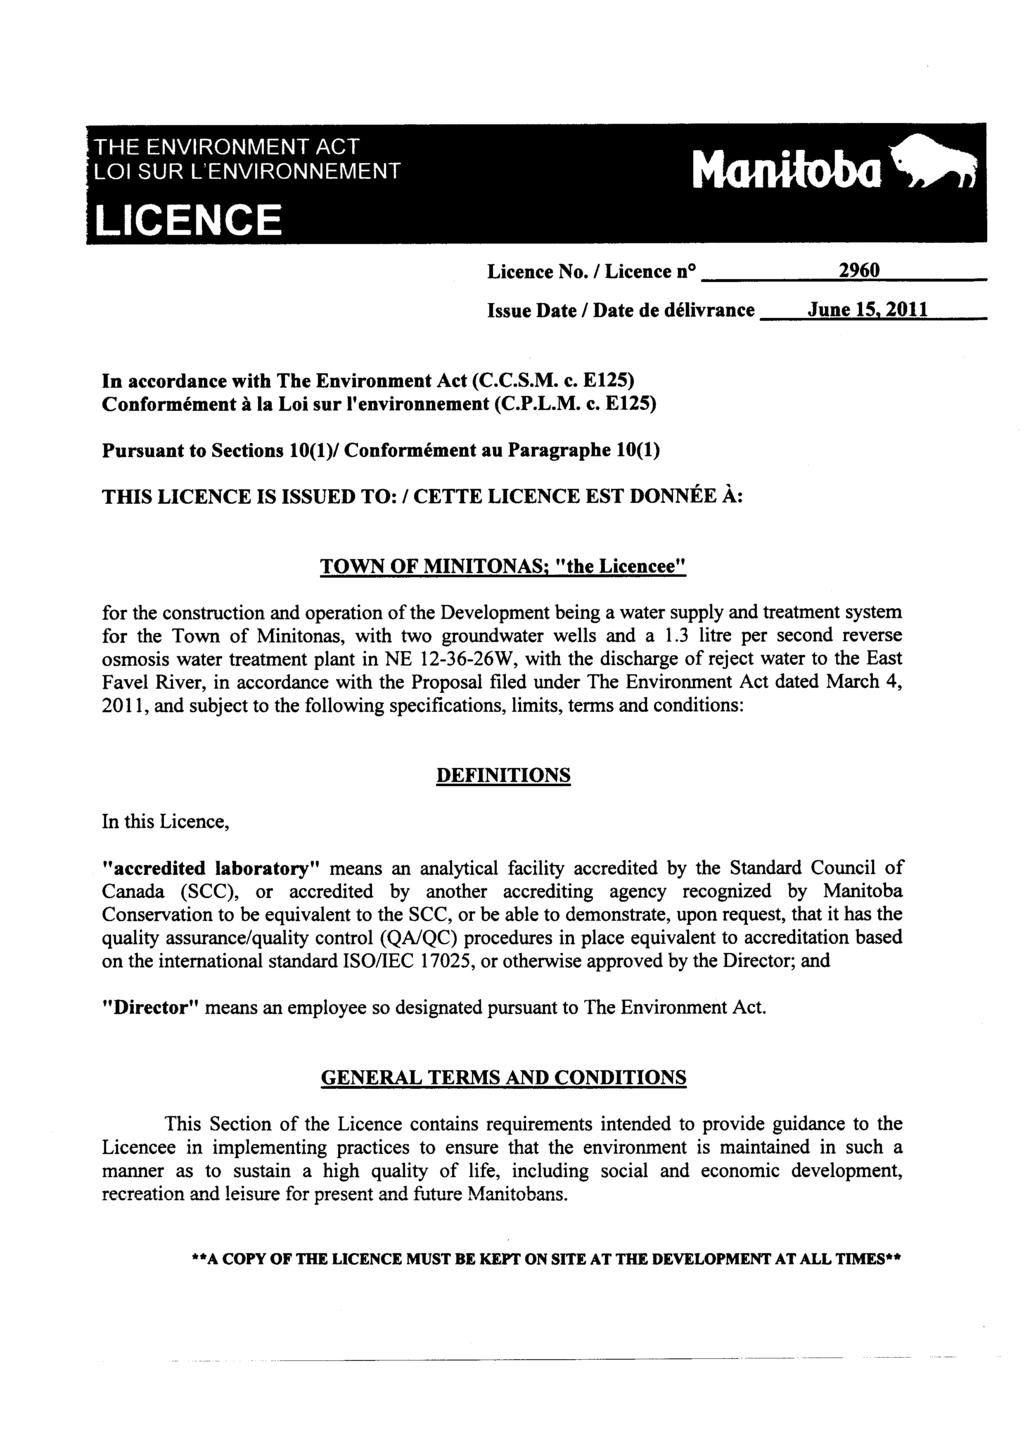 THE ENVIRONMENT ACT LOI SUR L'ENVIRONNEMENT Licence No. / Licence n 2960 Issue Date / Date de delivrance June 15, 2011 In accordance with The Environment Act (C.C.S.M. c.